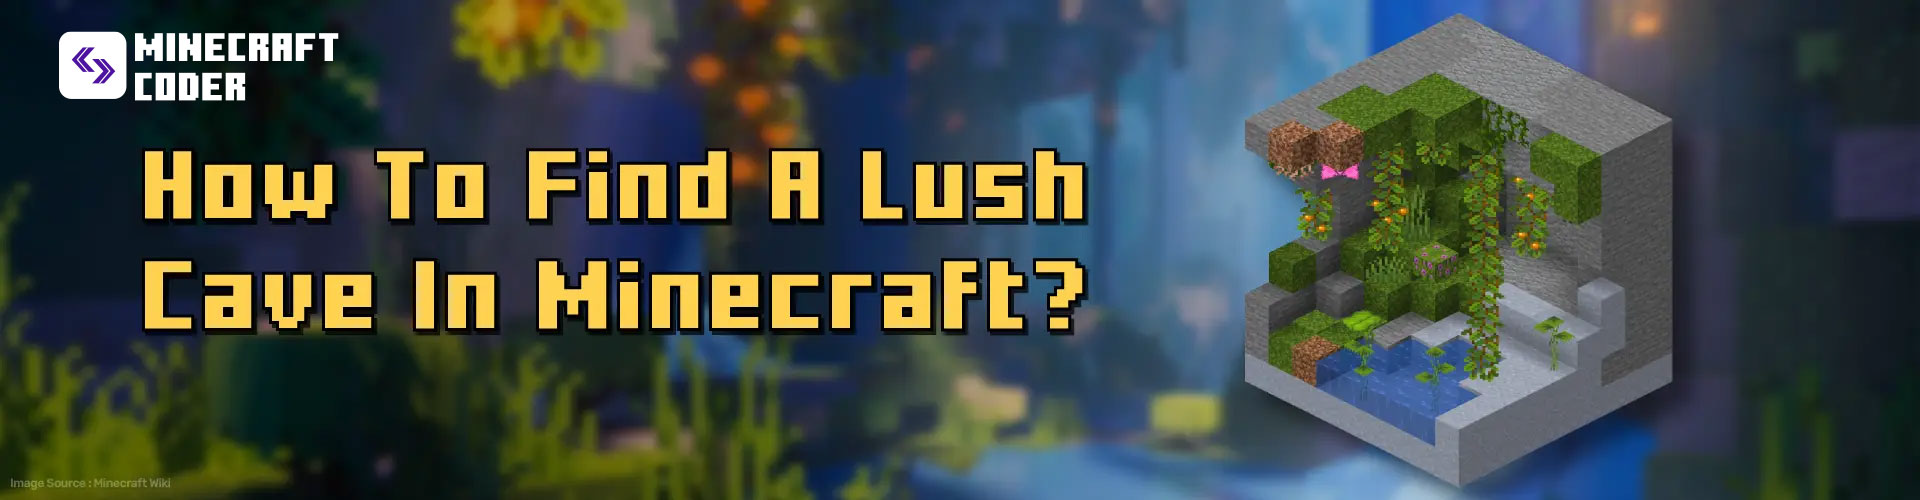 How to Find a Lush Cave In Minecraft